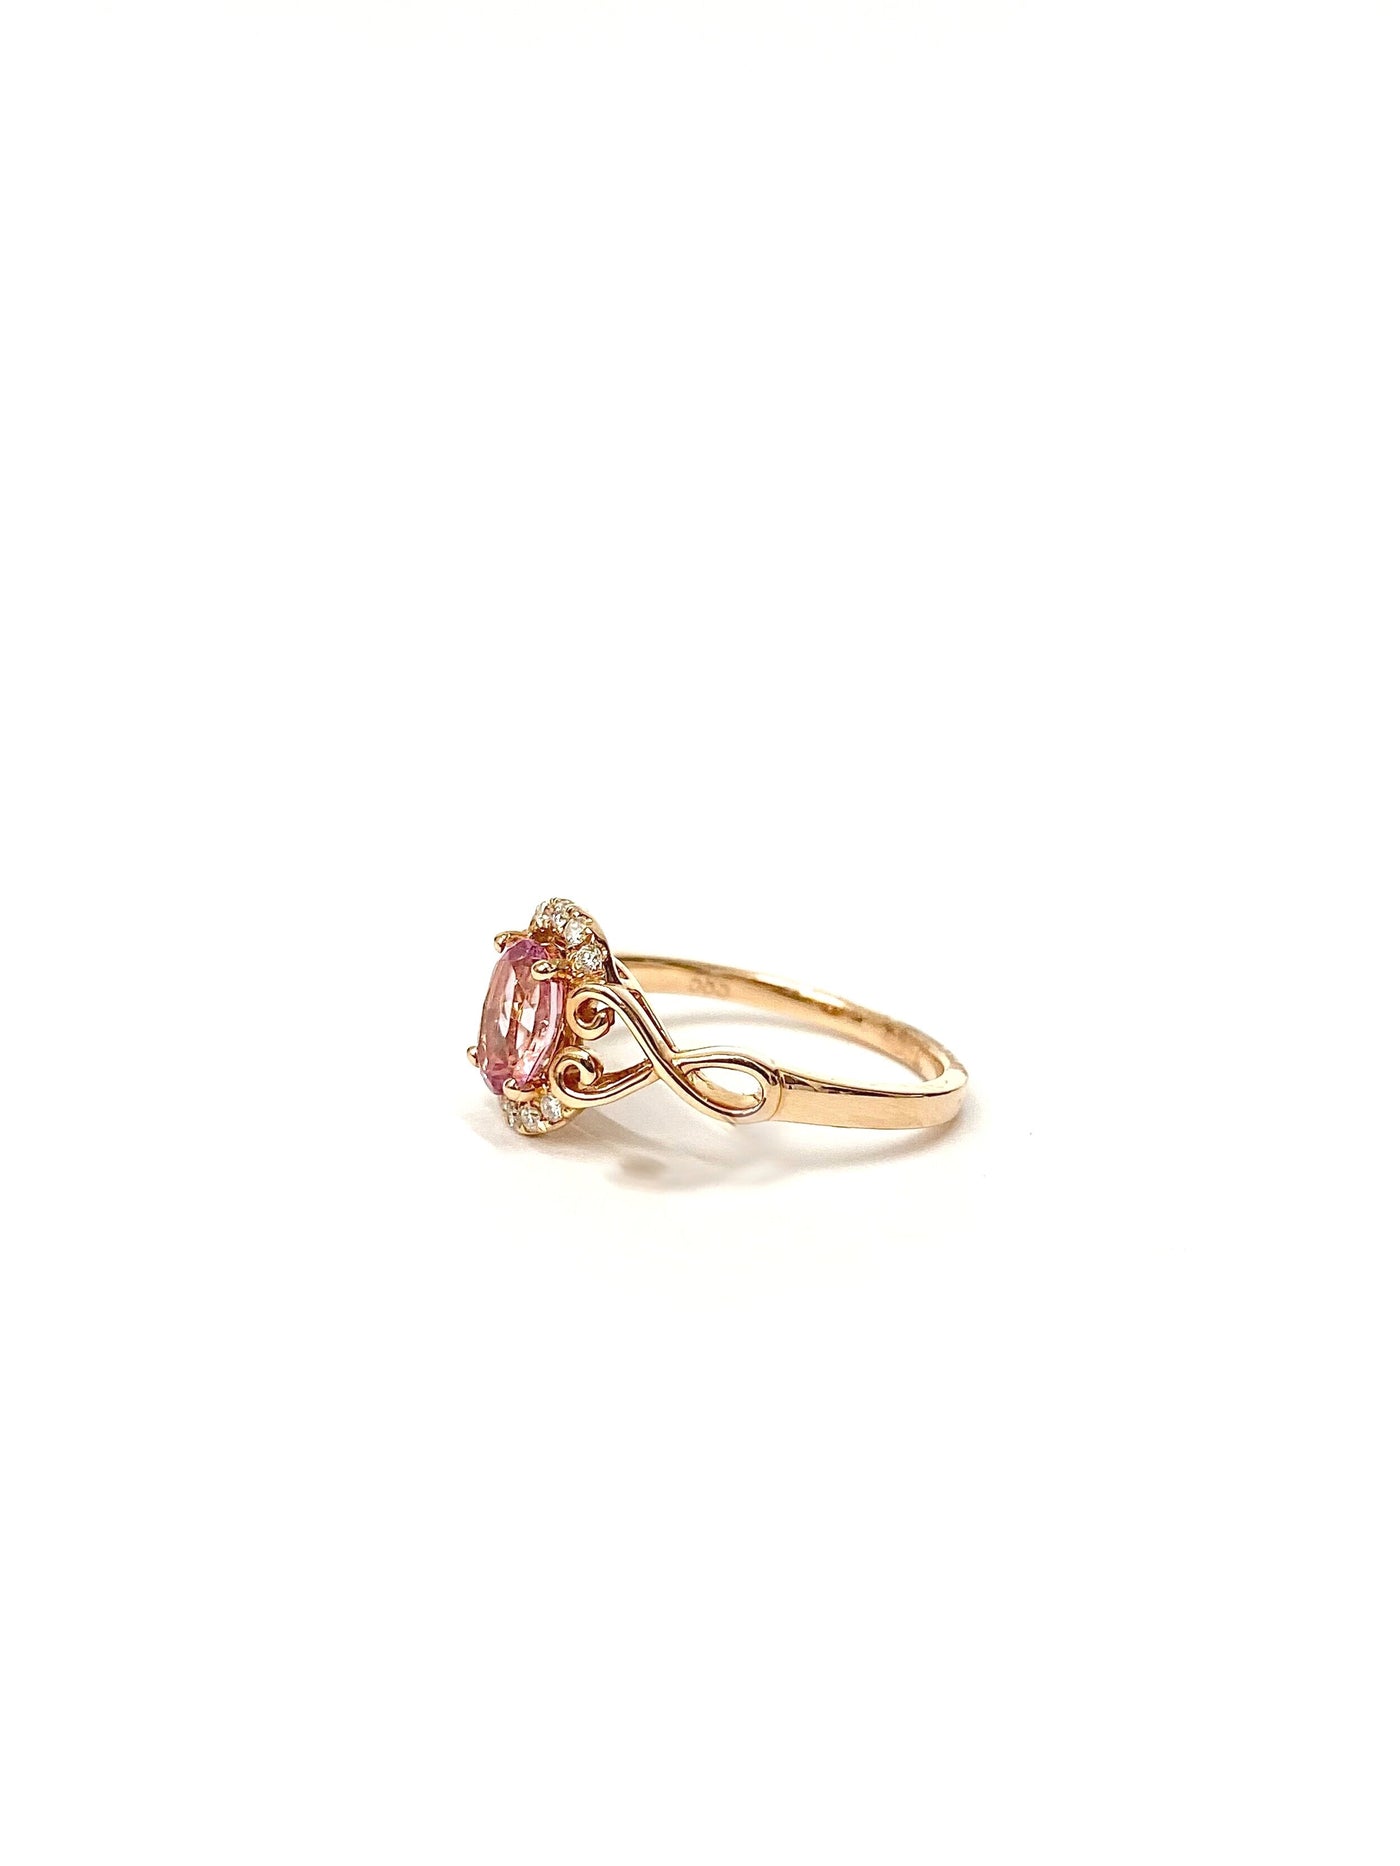 14 Karat Rose Gold Pink Topaz and Diamond Ring with Heart Accents